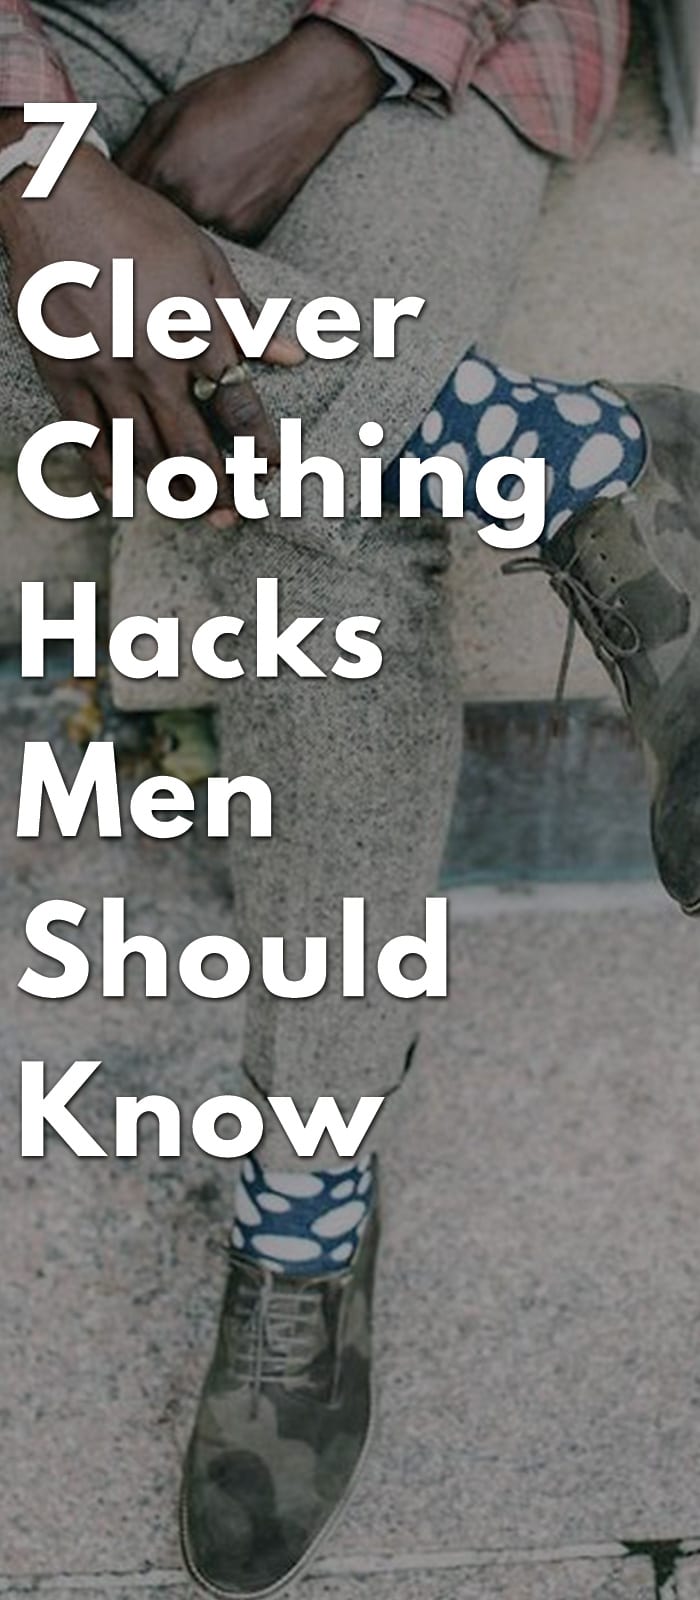 7-Clever-Clothing-Hacks-Men-Should-Know.